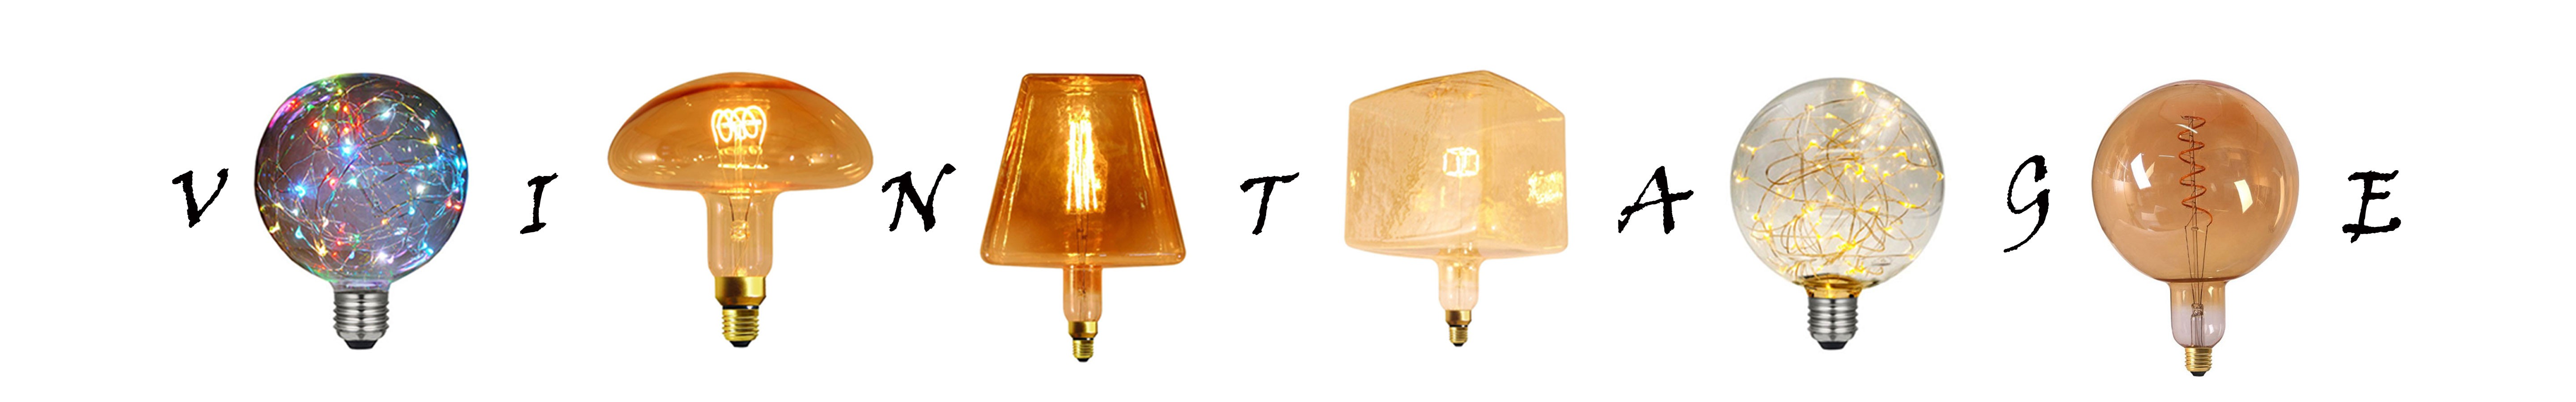 Decorate your house or apartment with these vintage lamps